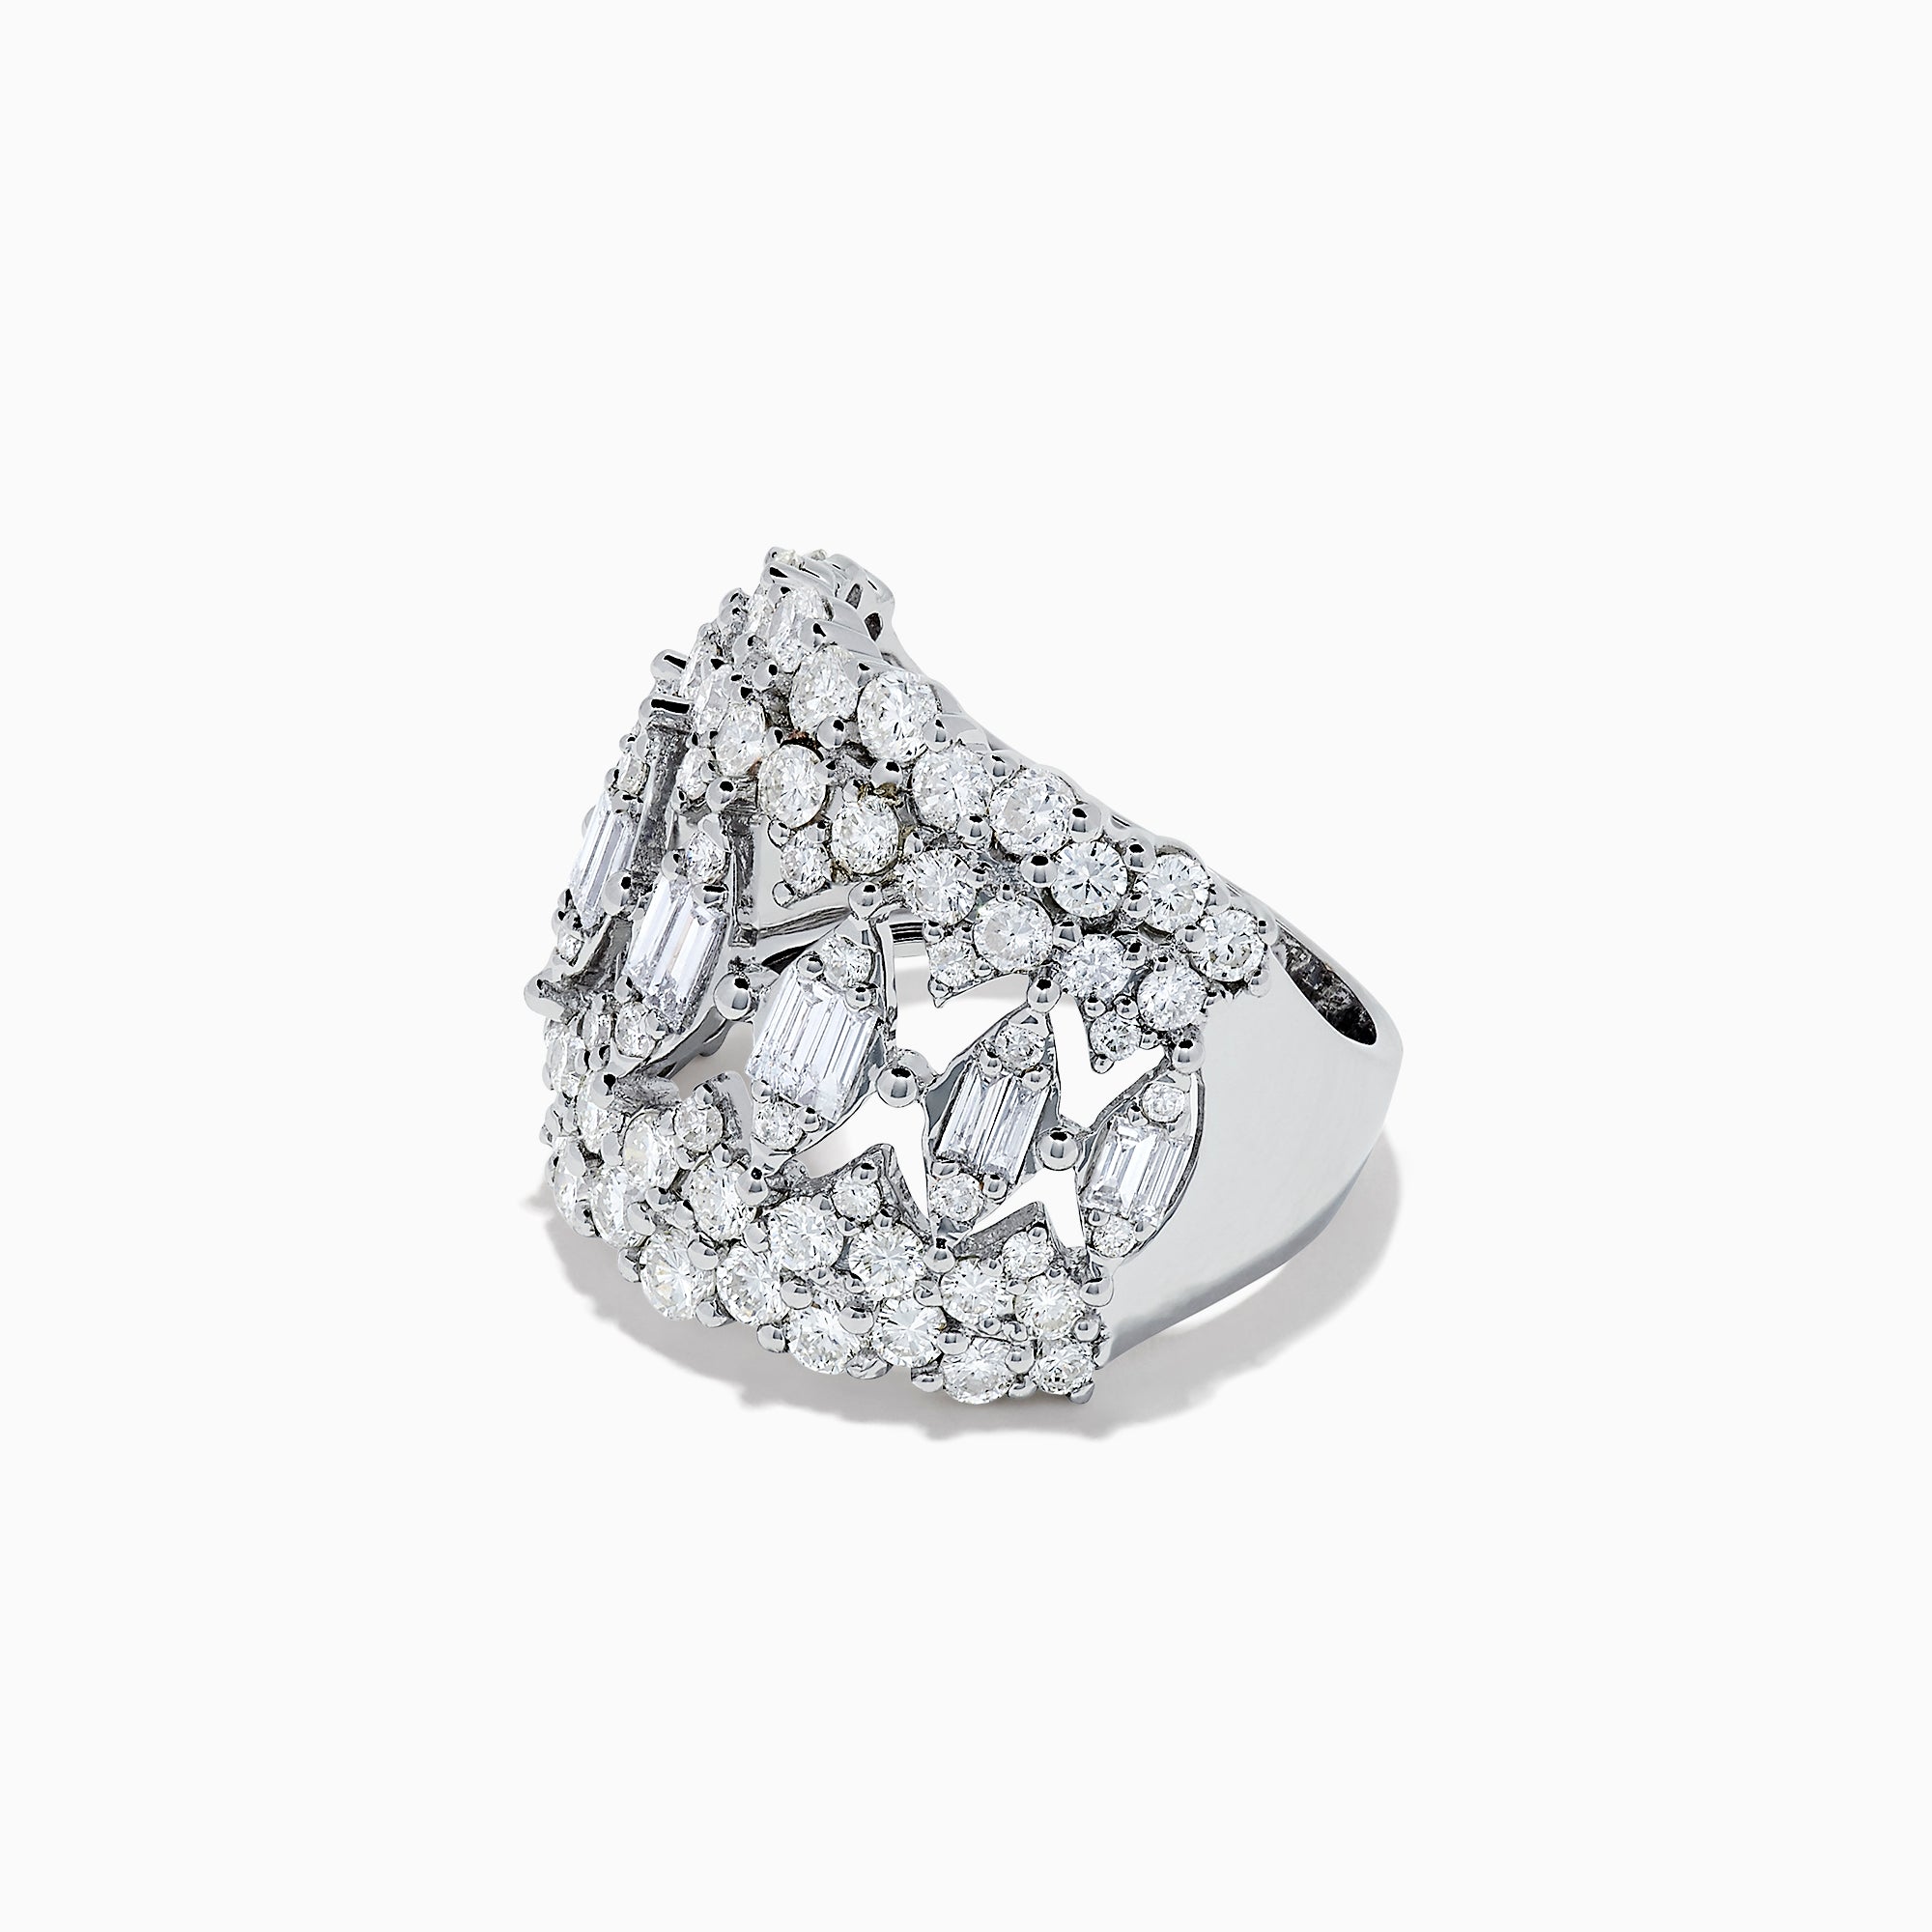 Effy Classique 14K White Gold Diamond Wide Band Ring, 2.59 TCW